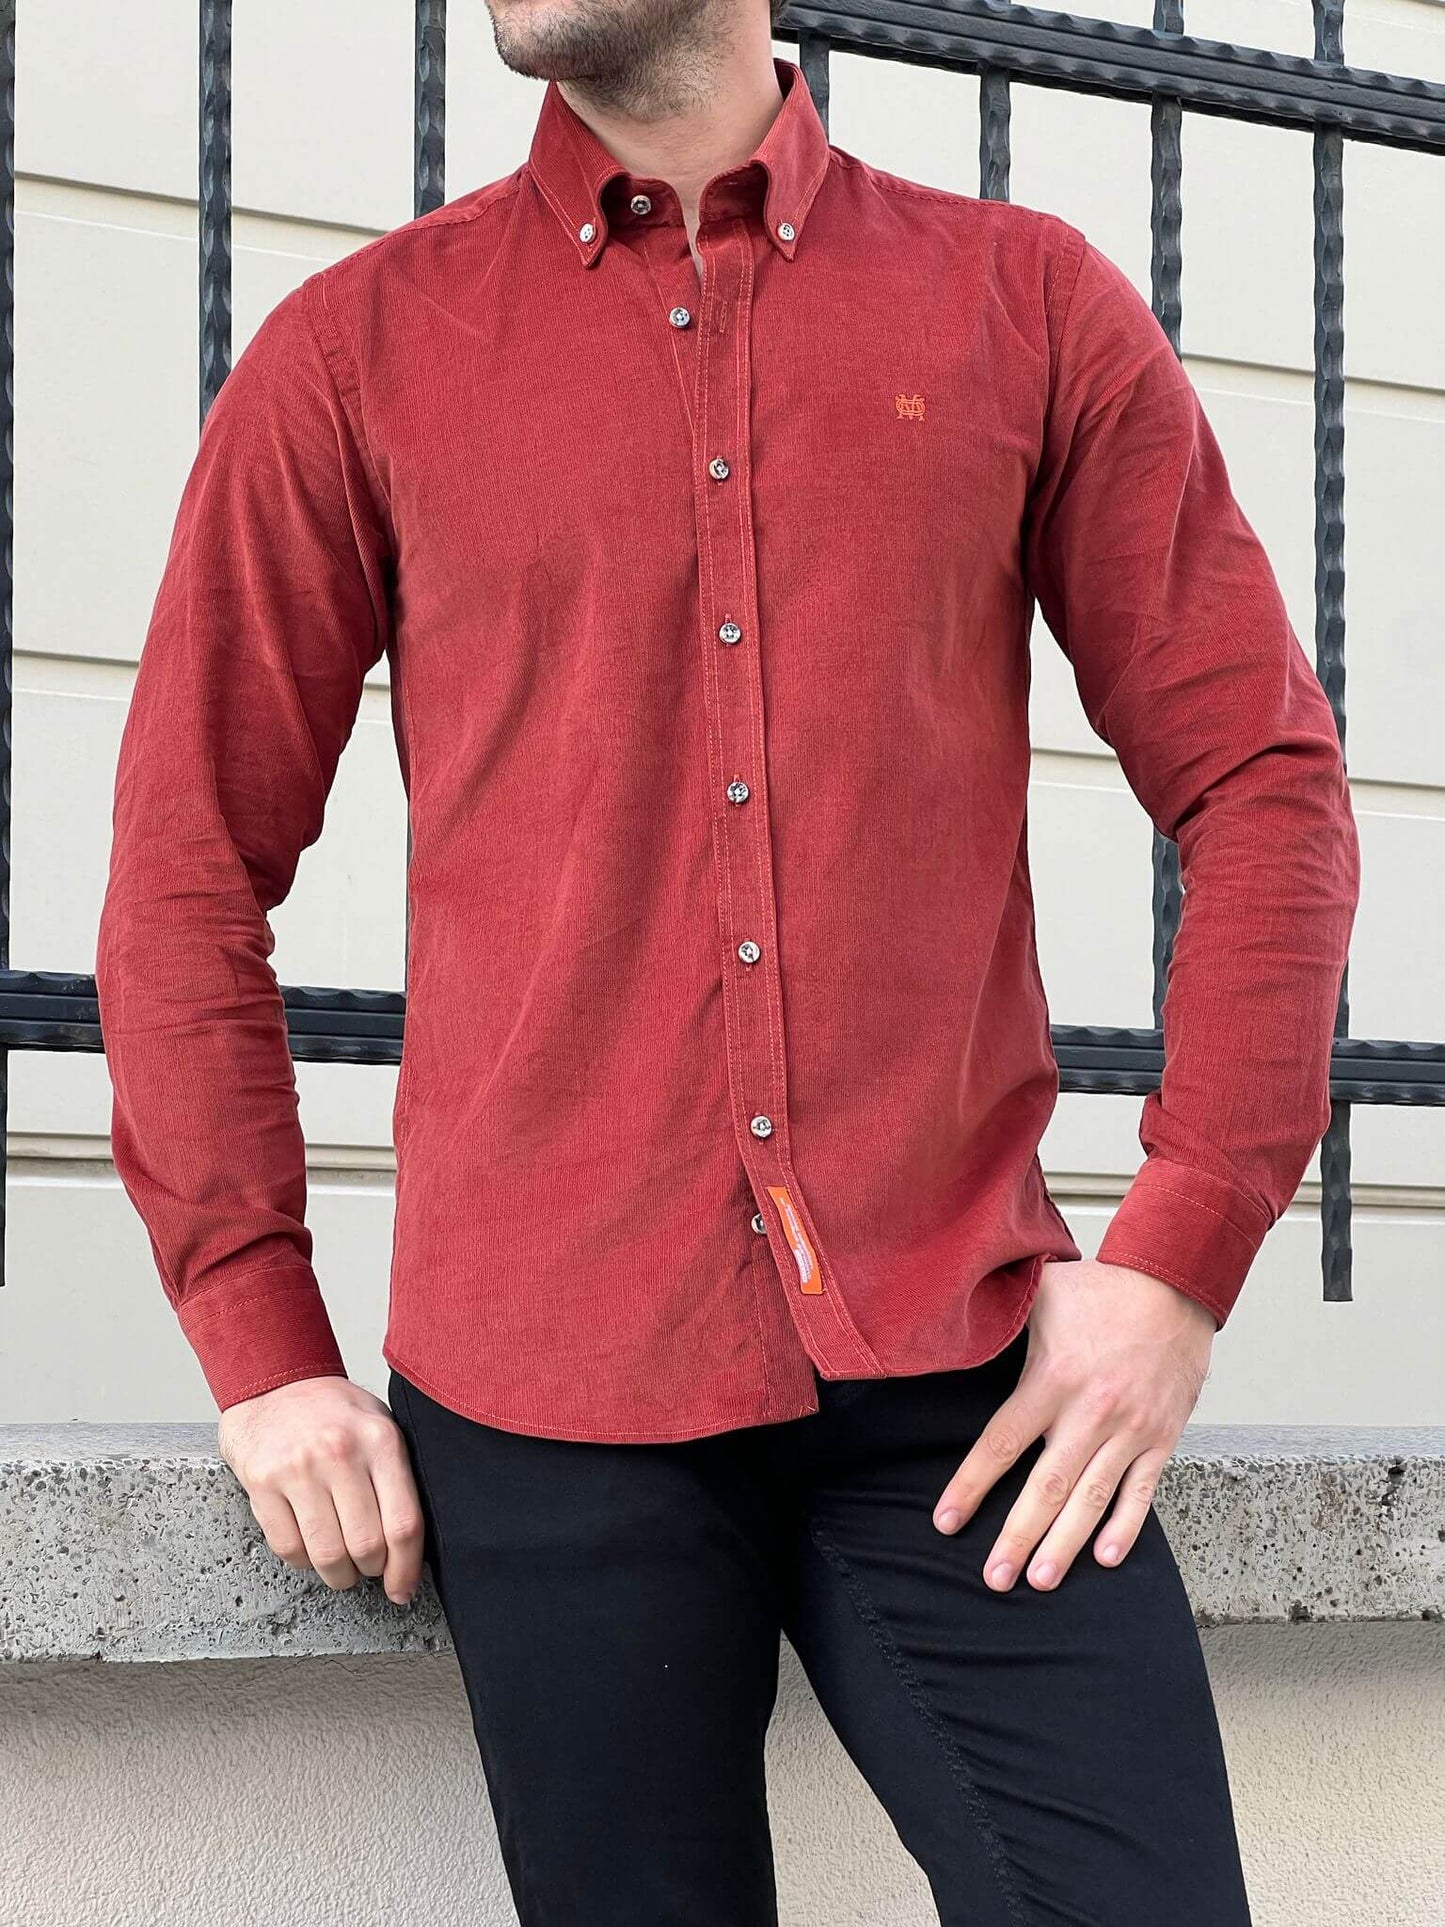 A male model in the Velvet Tile Shirt, exuding style and sophistication with a touch of urban flair.